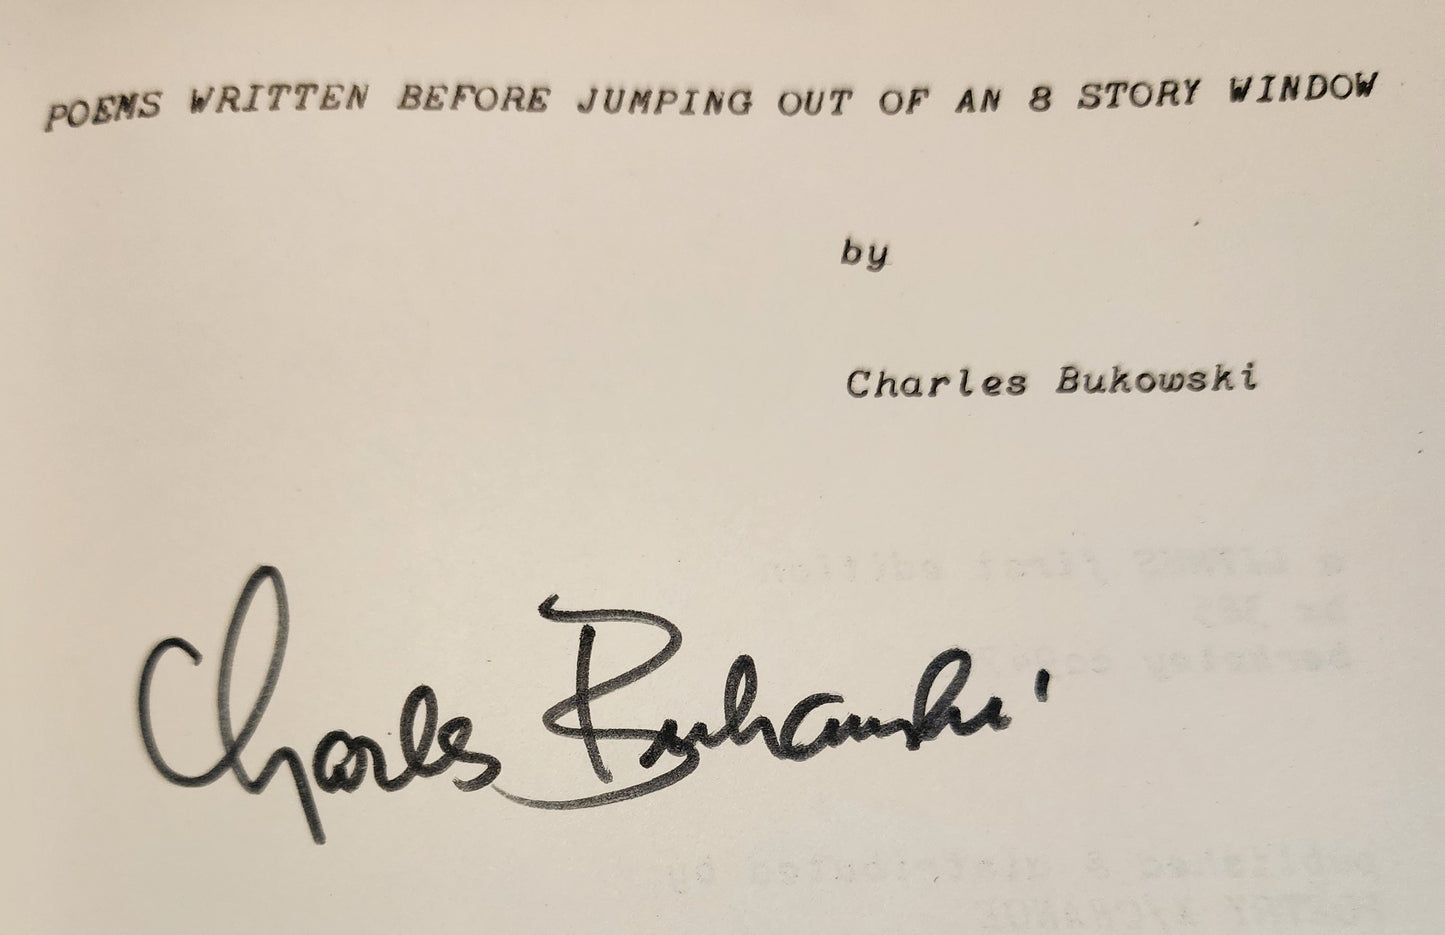 Signed by Charles Bukowski: Poems Written Before Jumping Out of an 8 Story Window (1968).